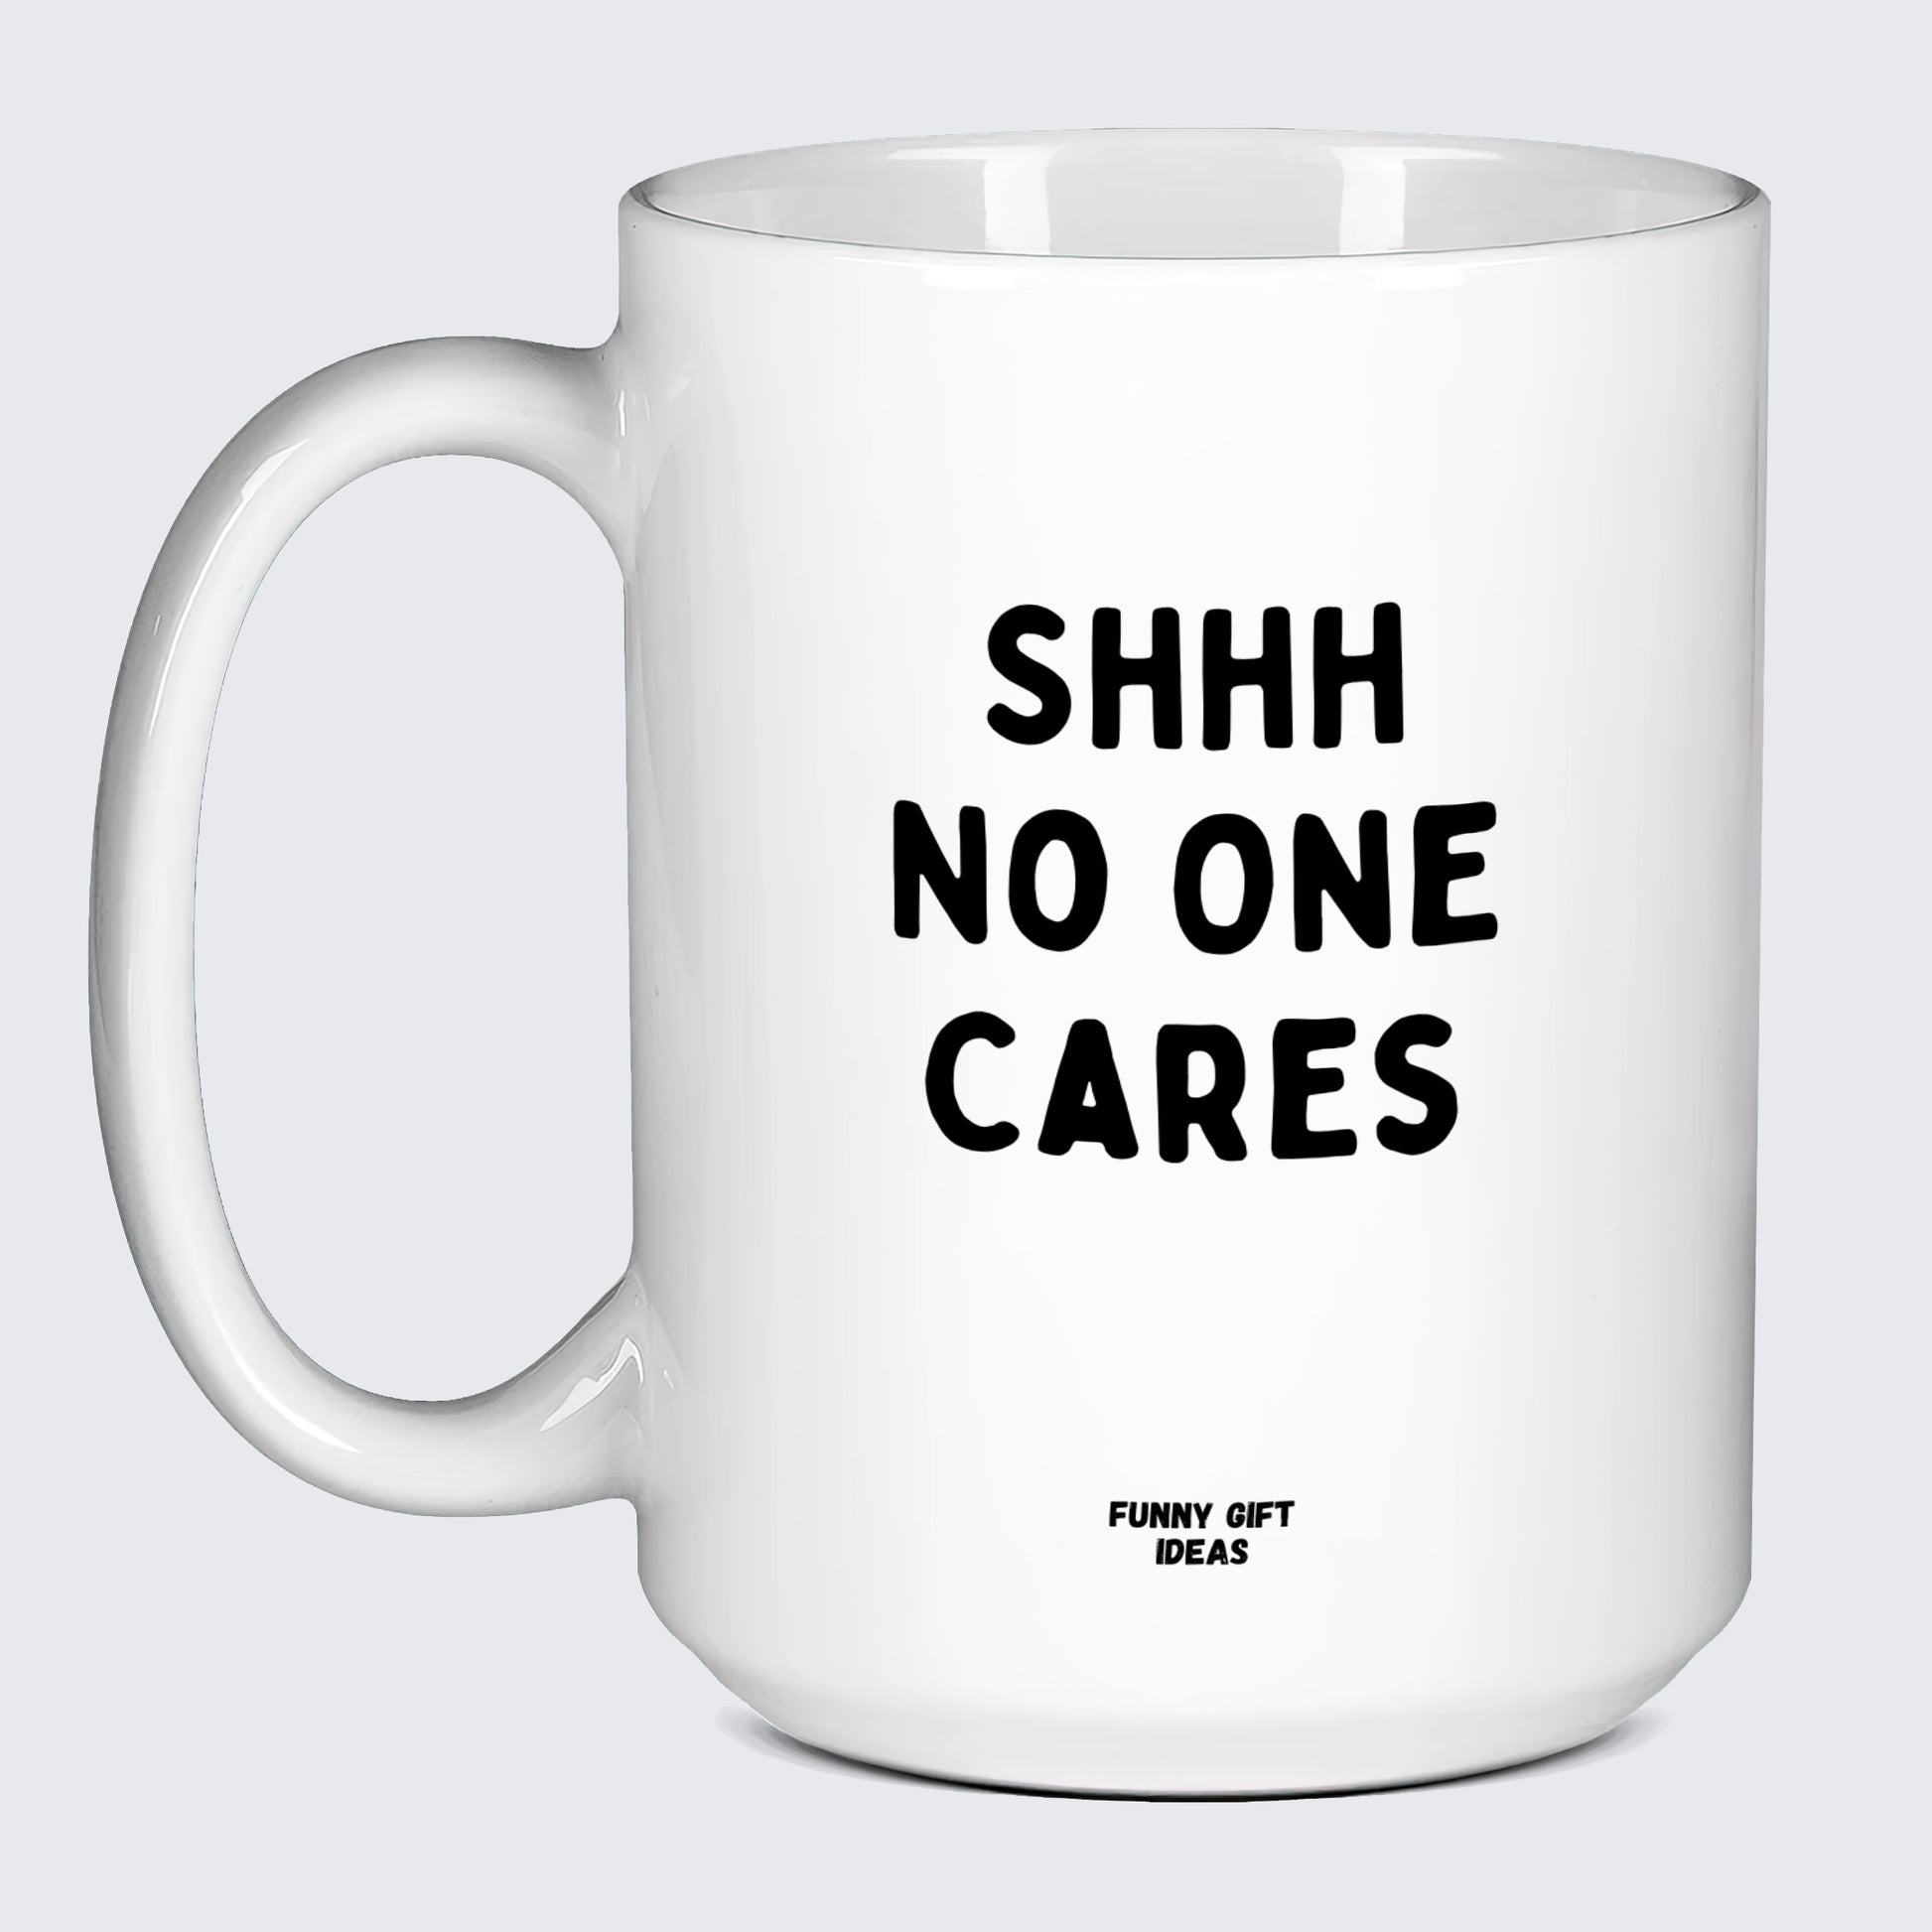 Good Gifts for Dad Shhh No One Cares - Funny Gift Ideas